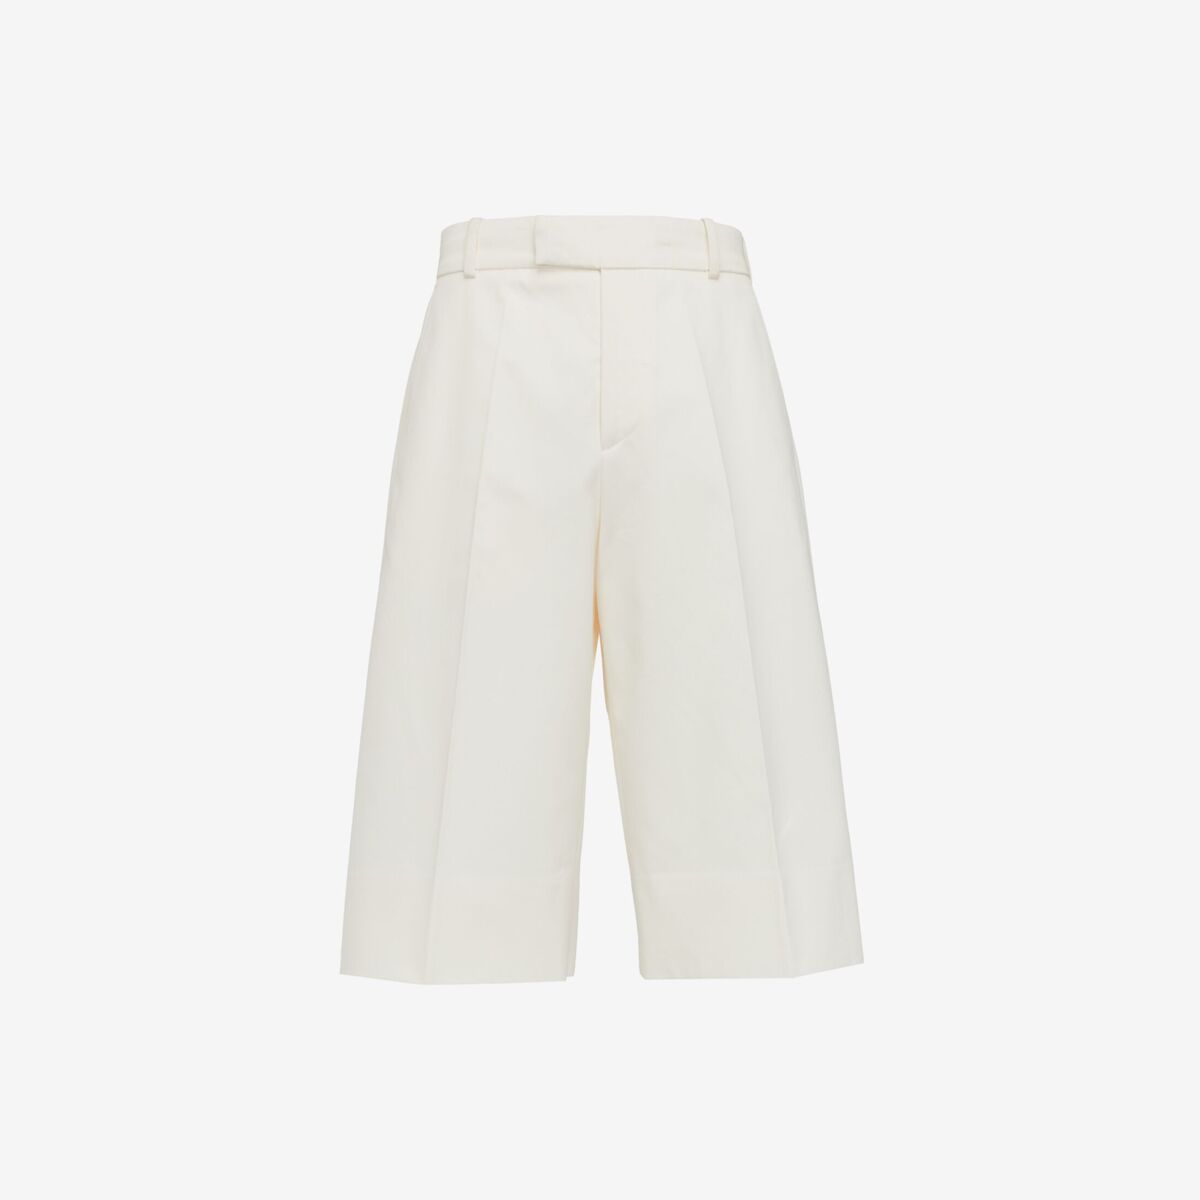 Alexander Mcqueen Pleated Baggy Shorts In Ivory